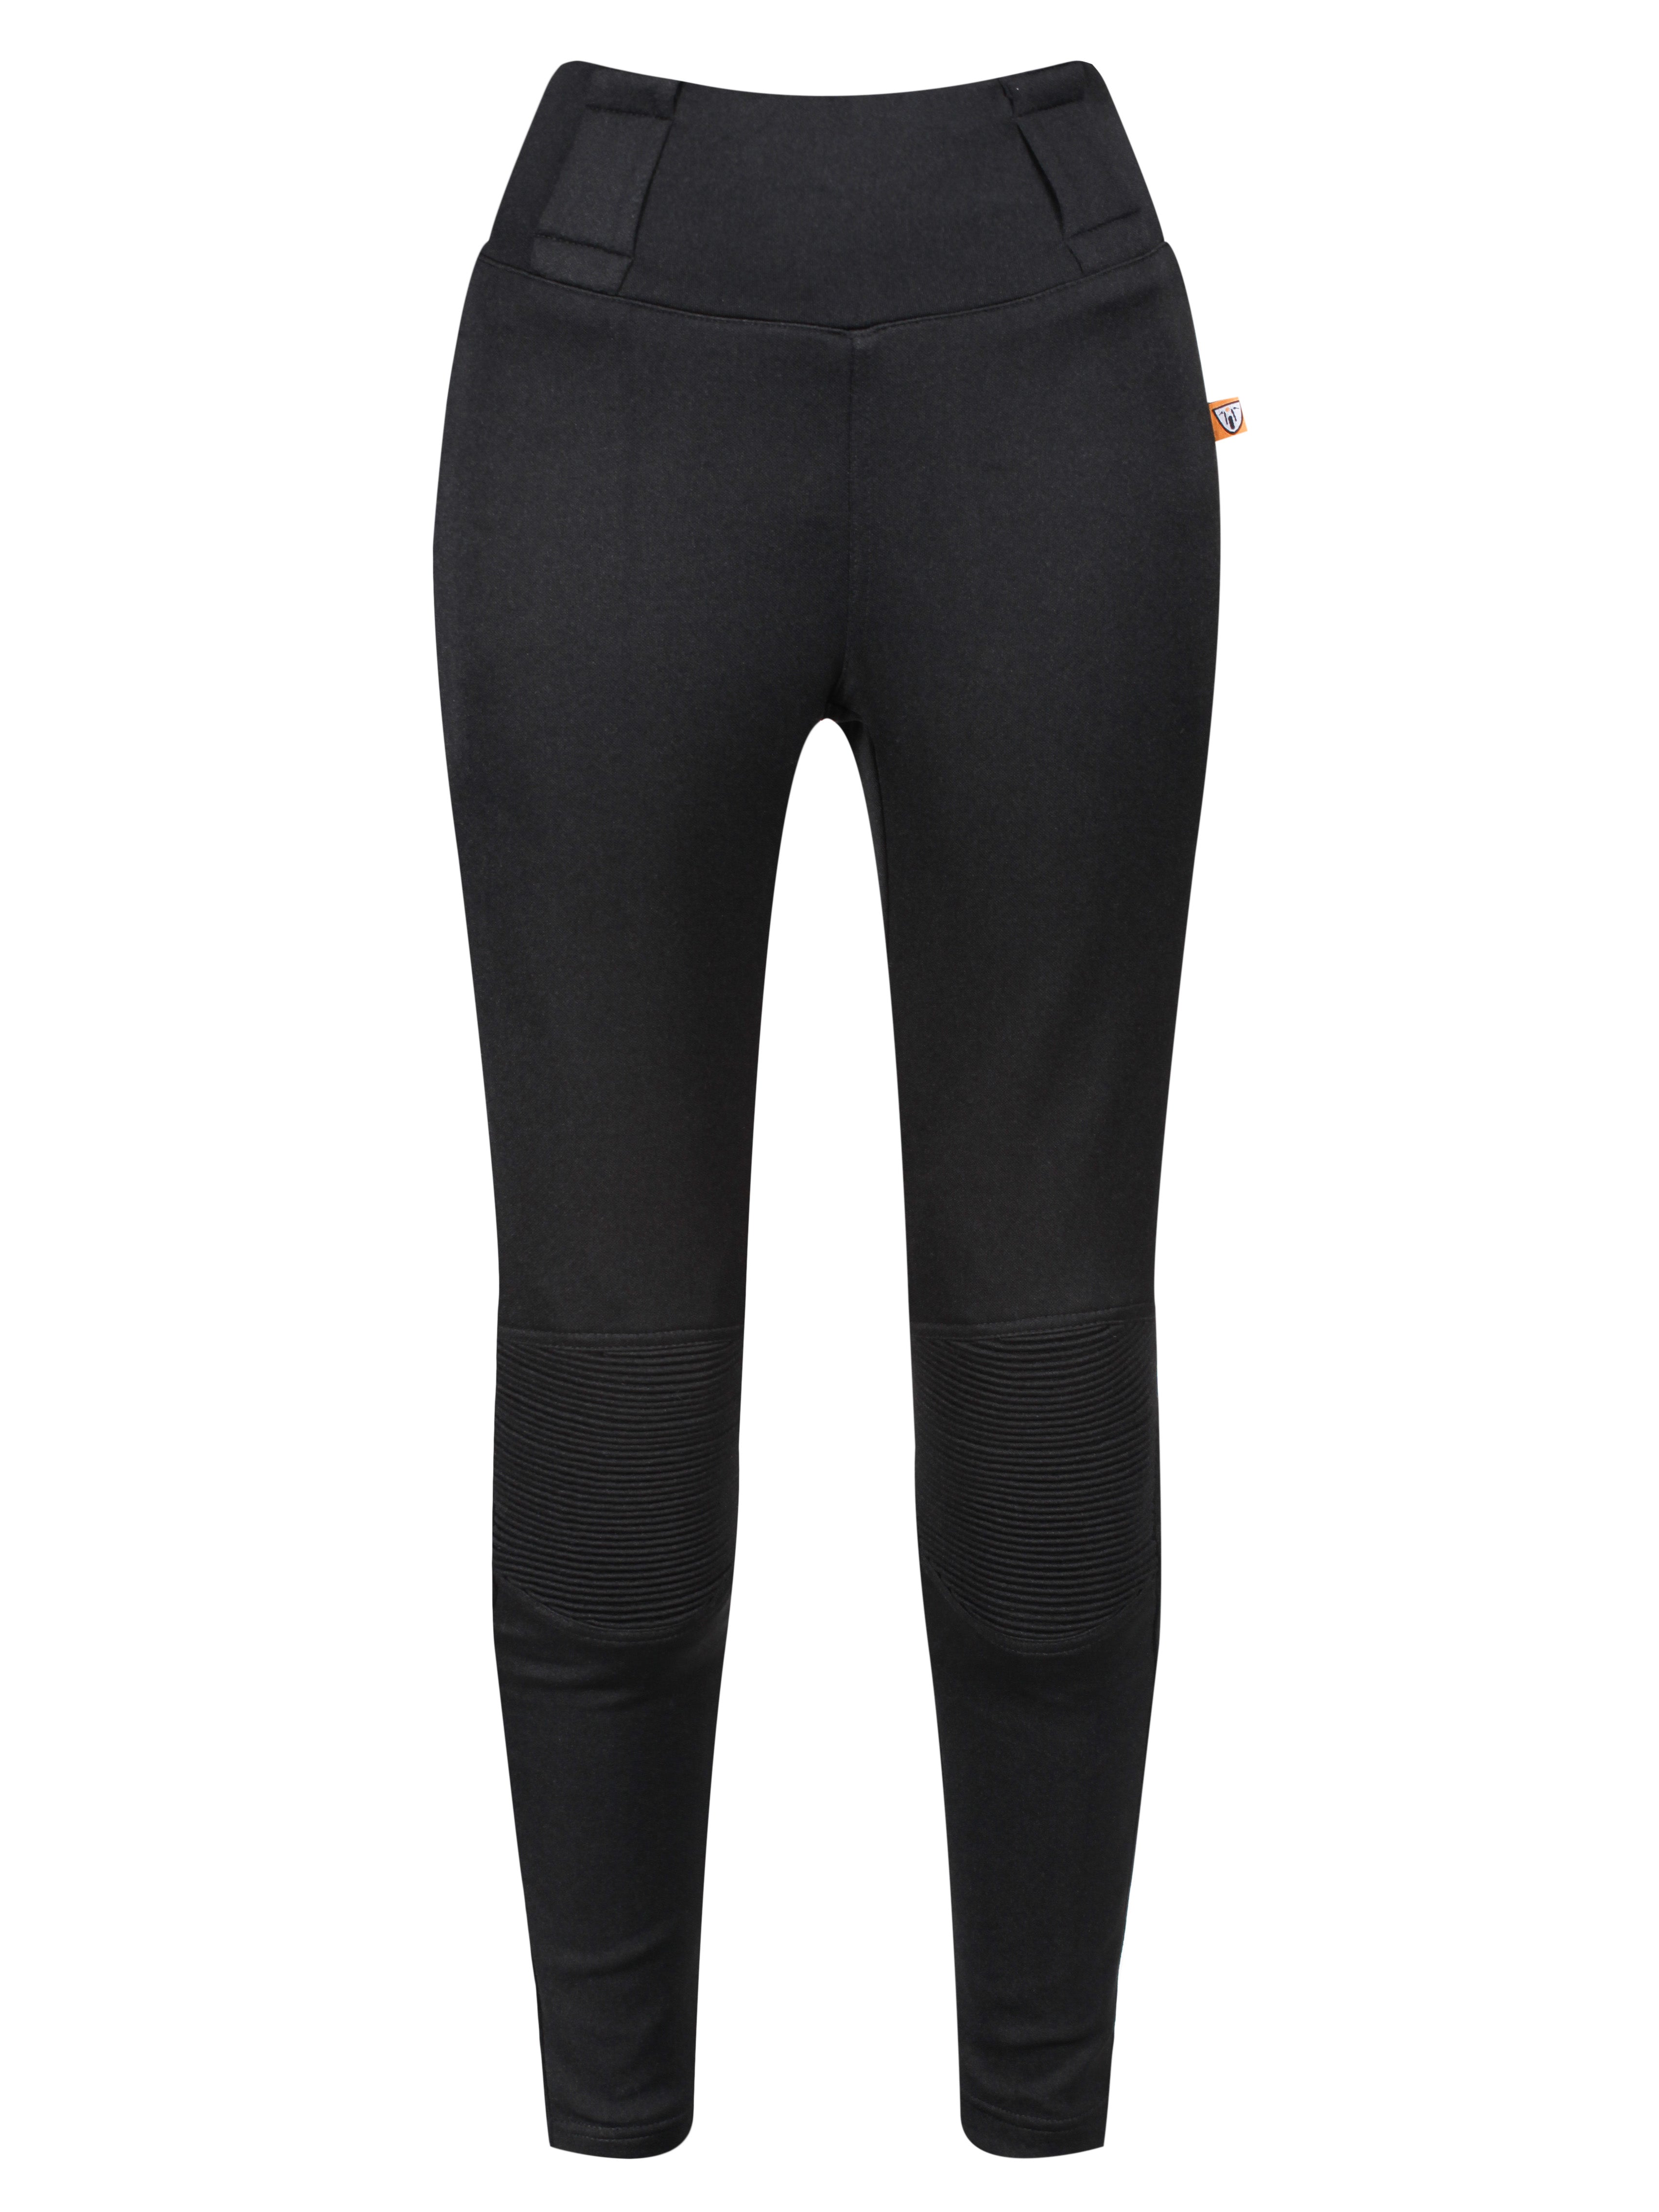 Black motorcycle leggings for women with high waist